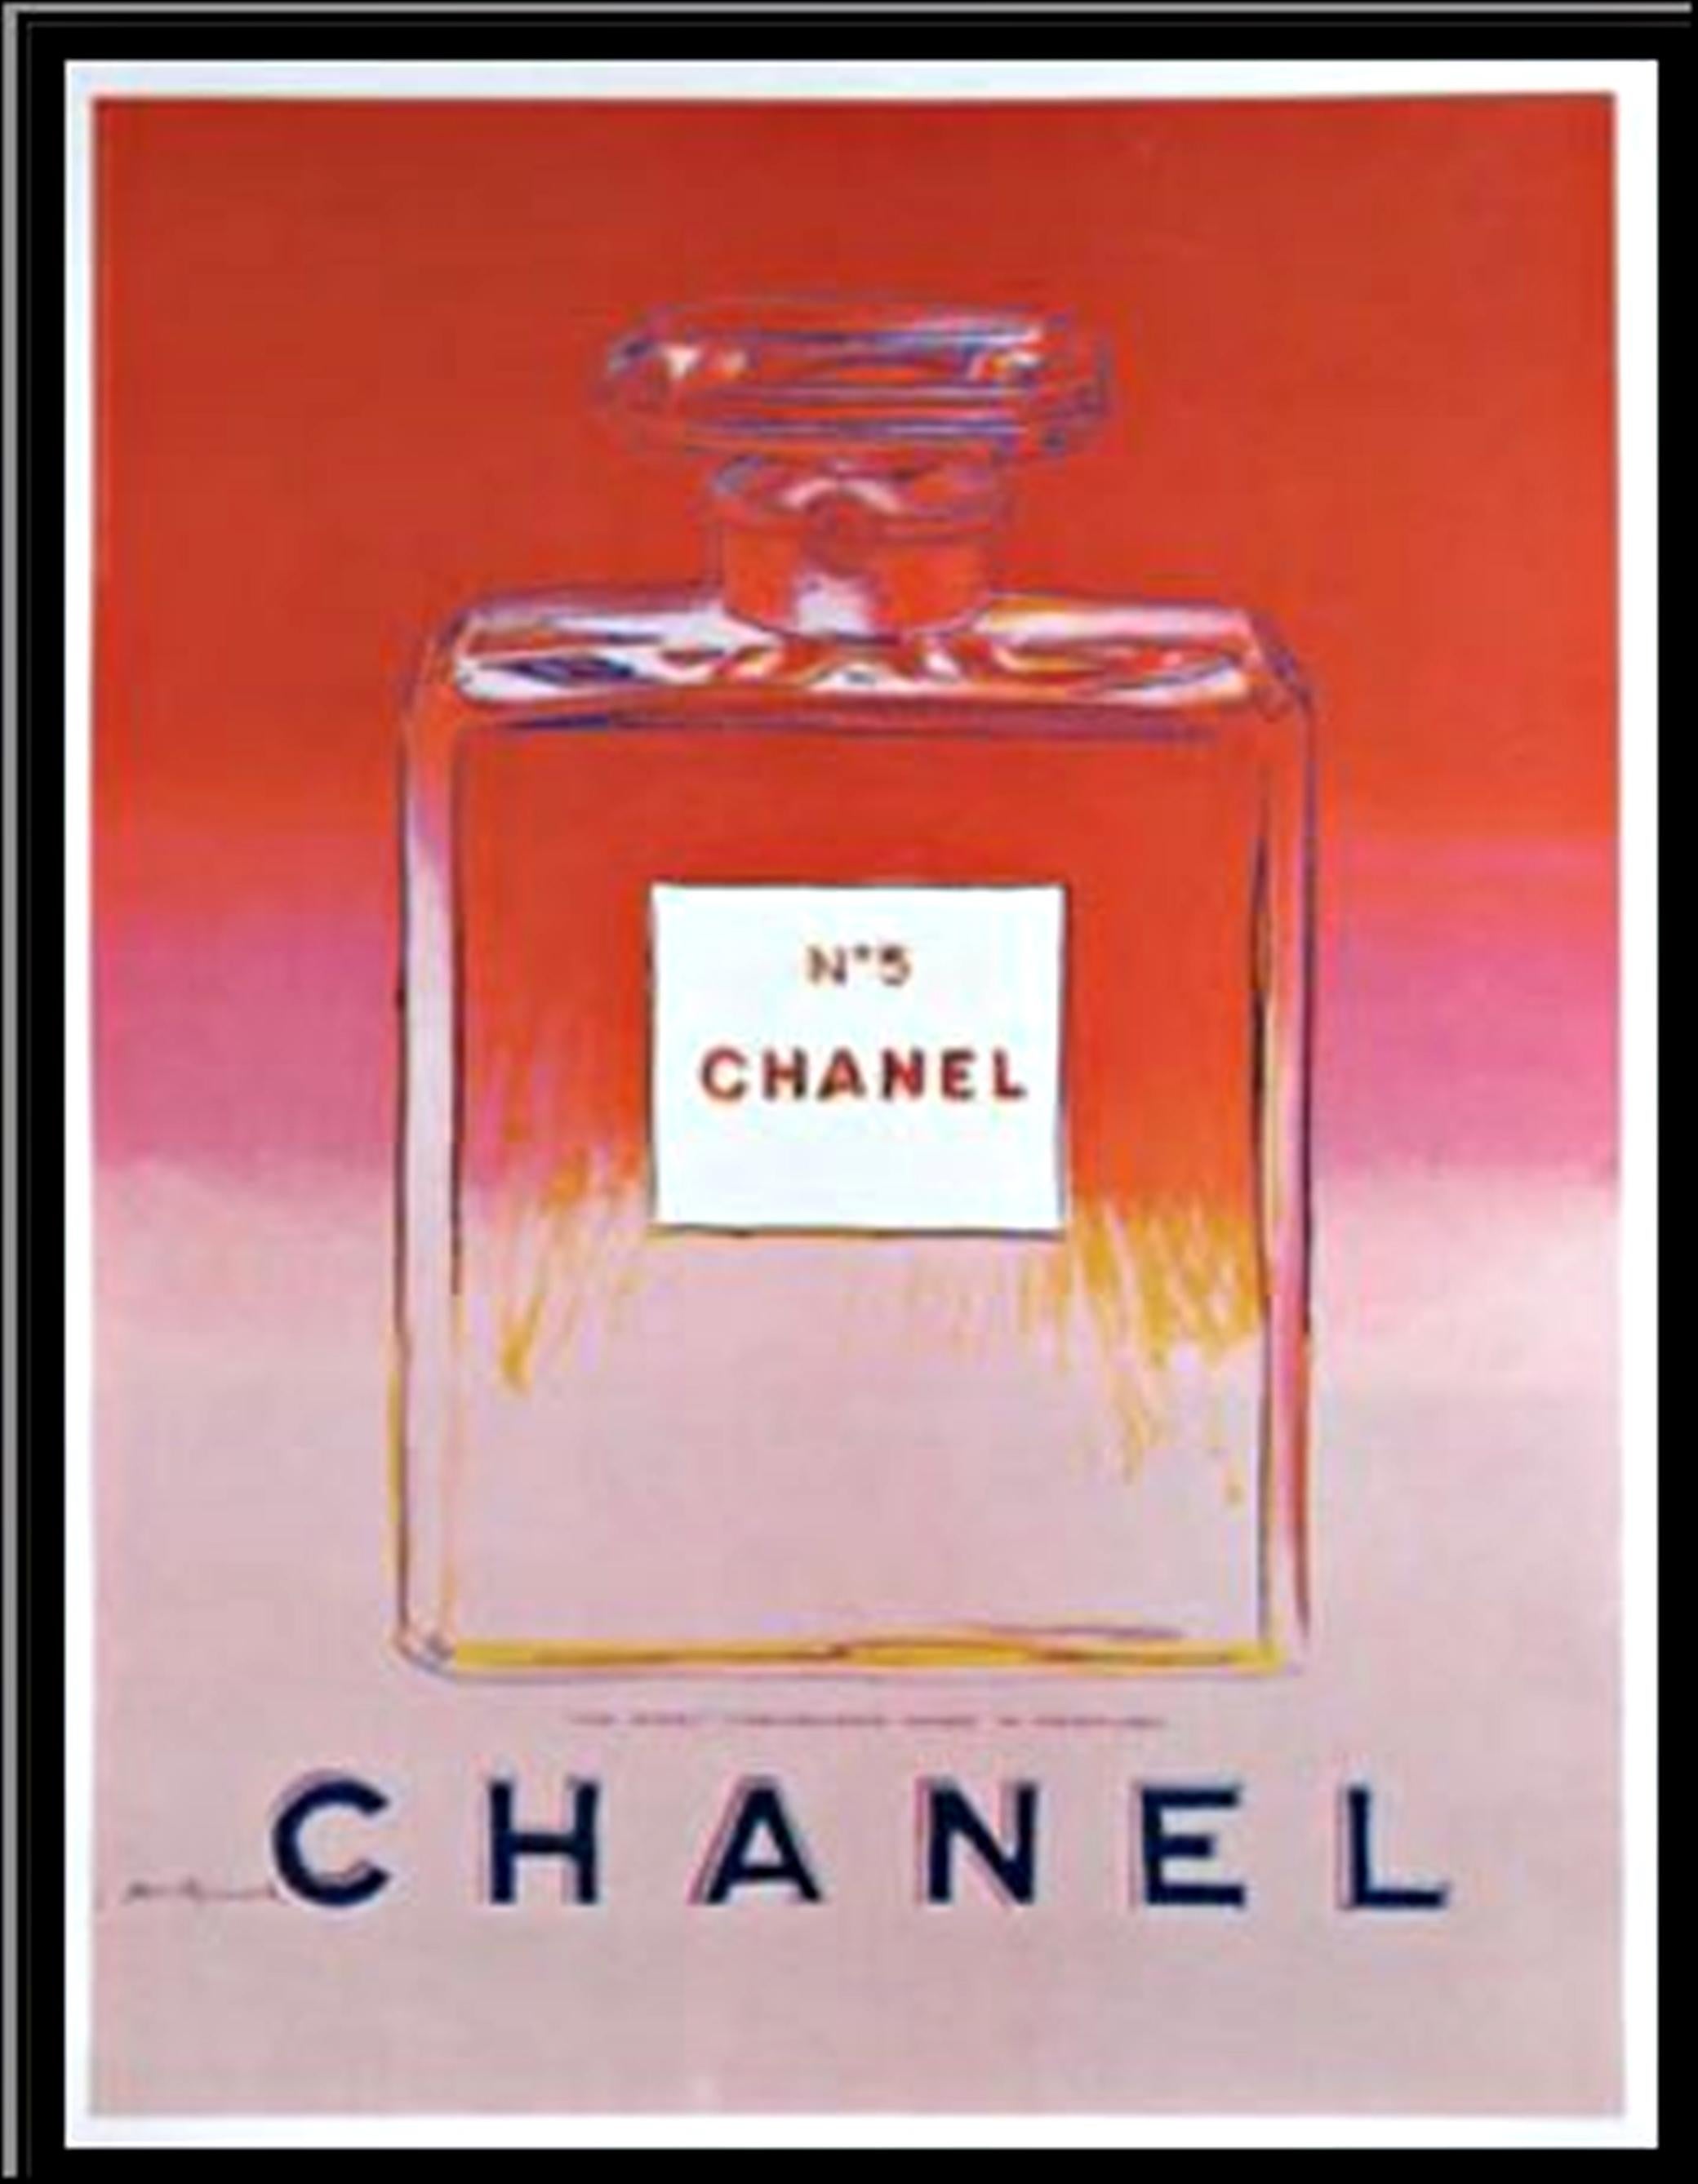 Chanel No. 5 (Suite of Four Individual (Separate) Prints on Linen Canvas) - Gray Abstract Print by Andy Warhol